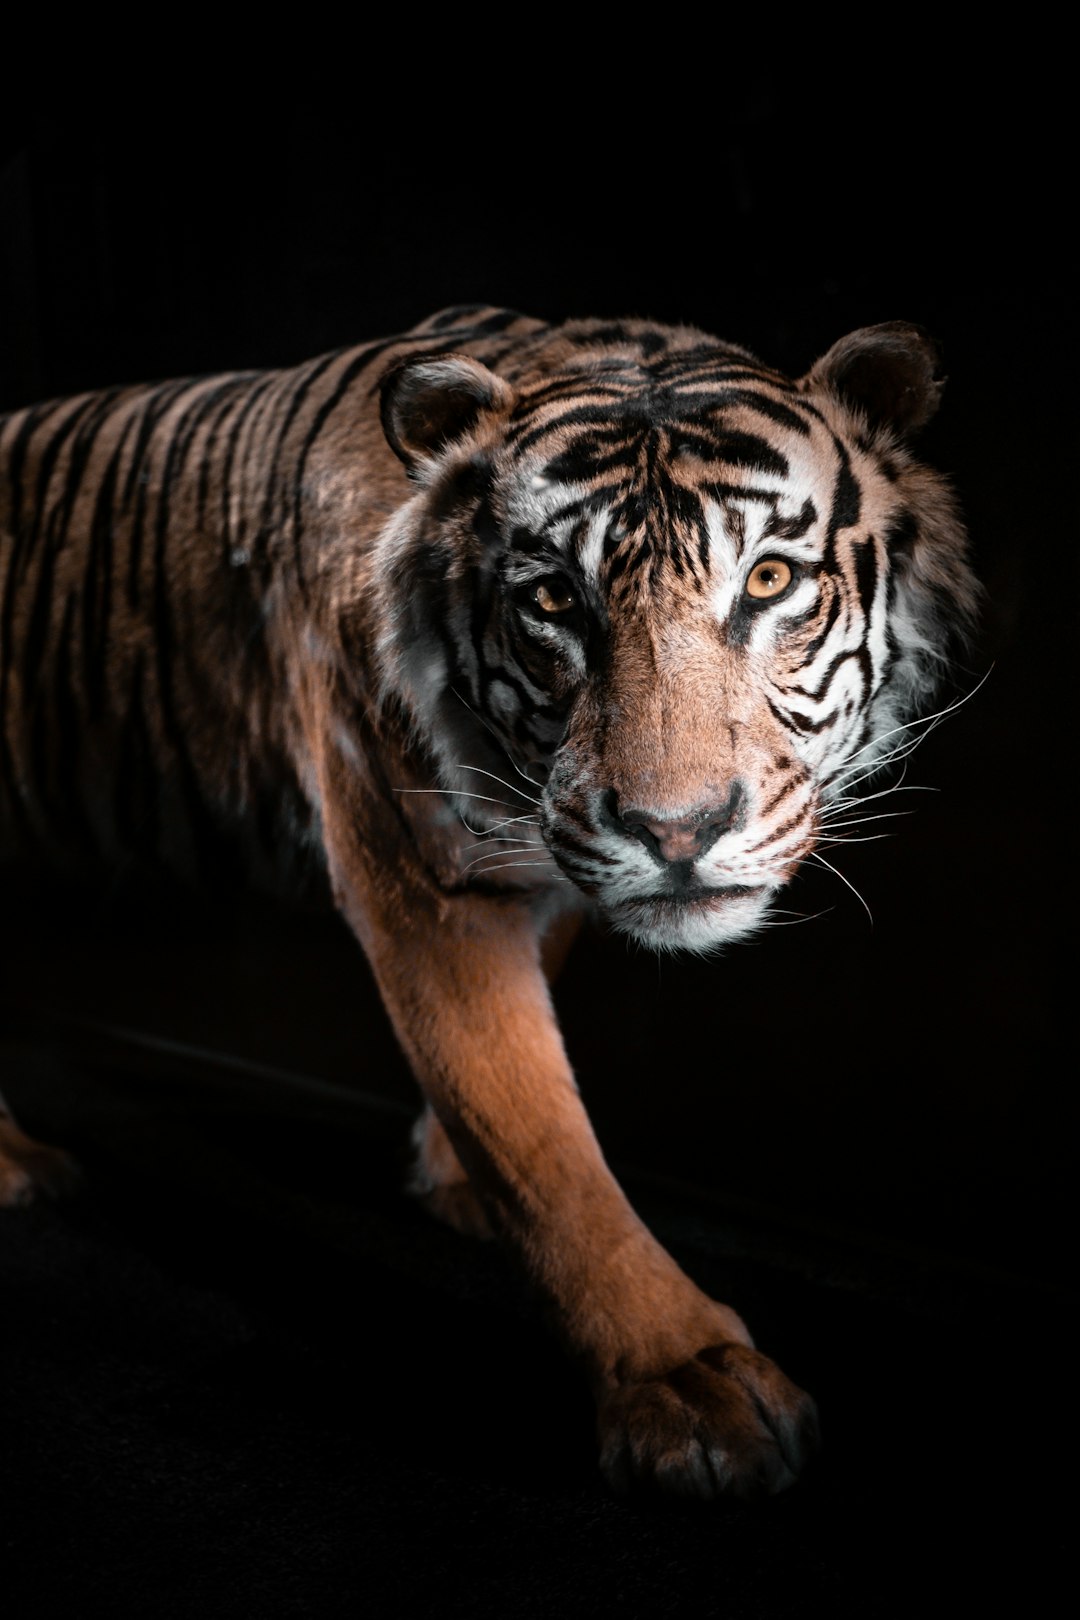  brown and white tiger on black background tiger